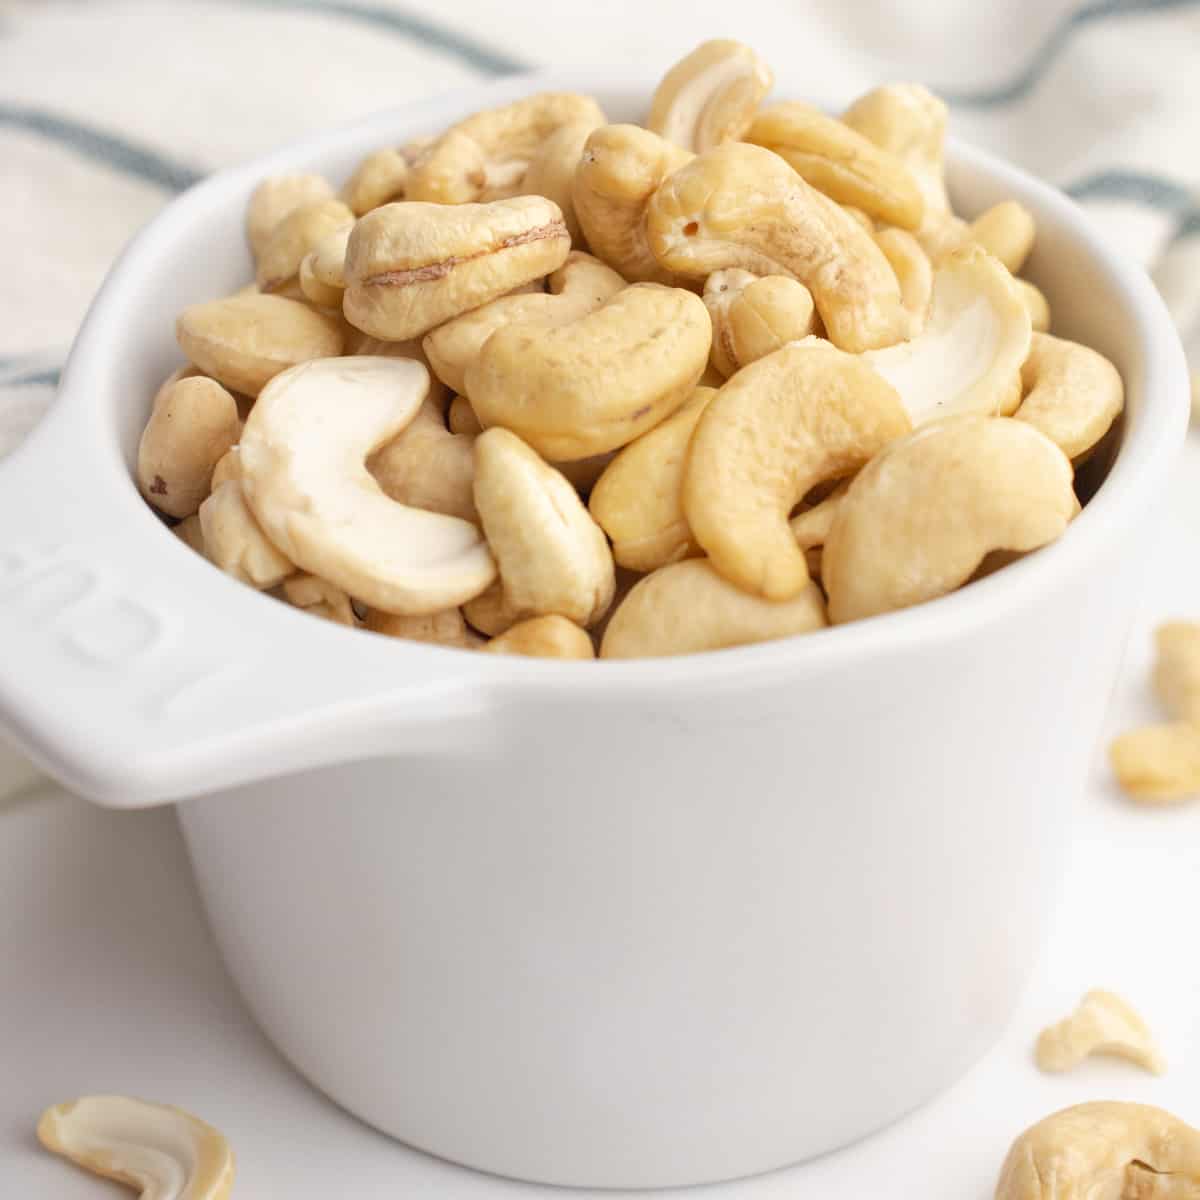 Soaking Cashews 3 Ways Where You Get Your Protein